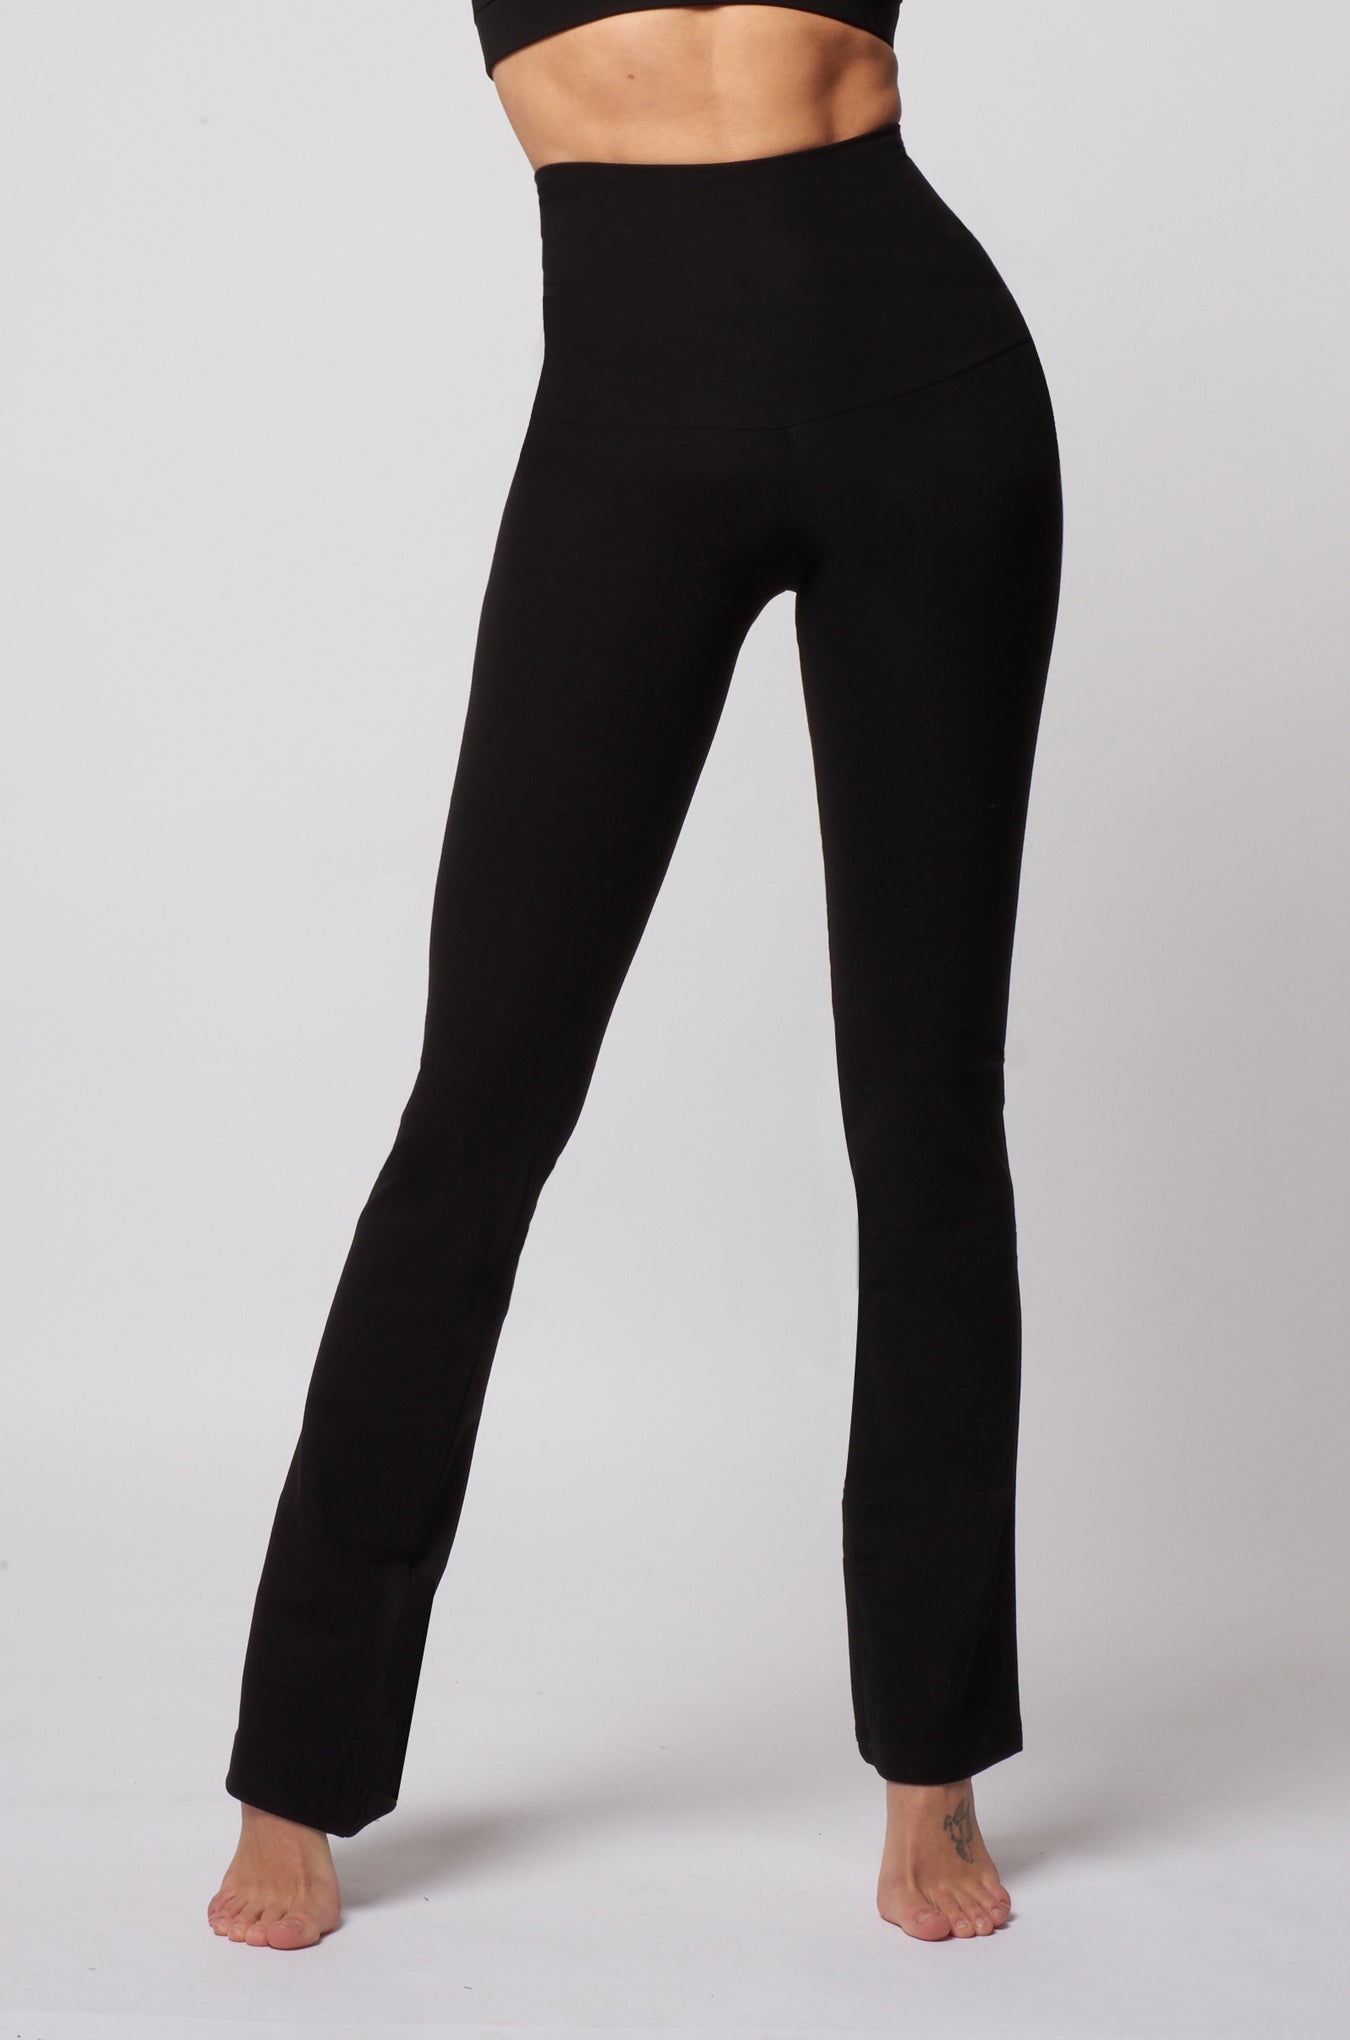 Women's Yoga Trousers, Gym Trousers